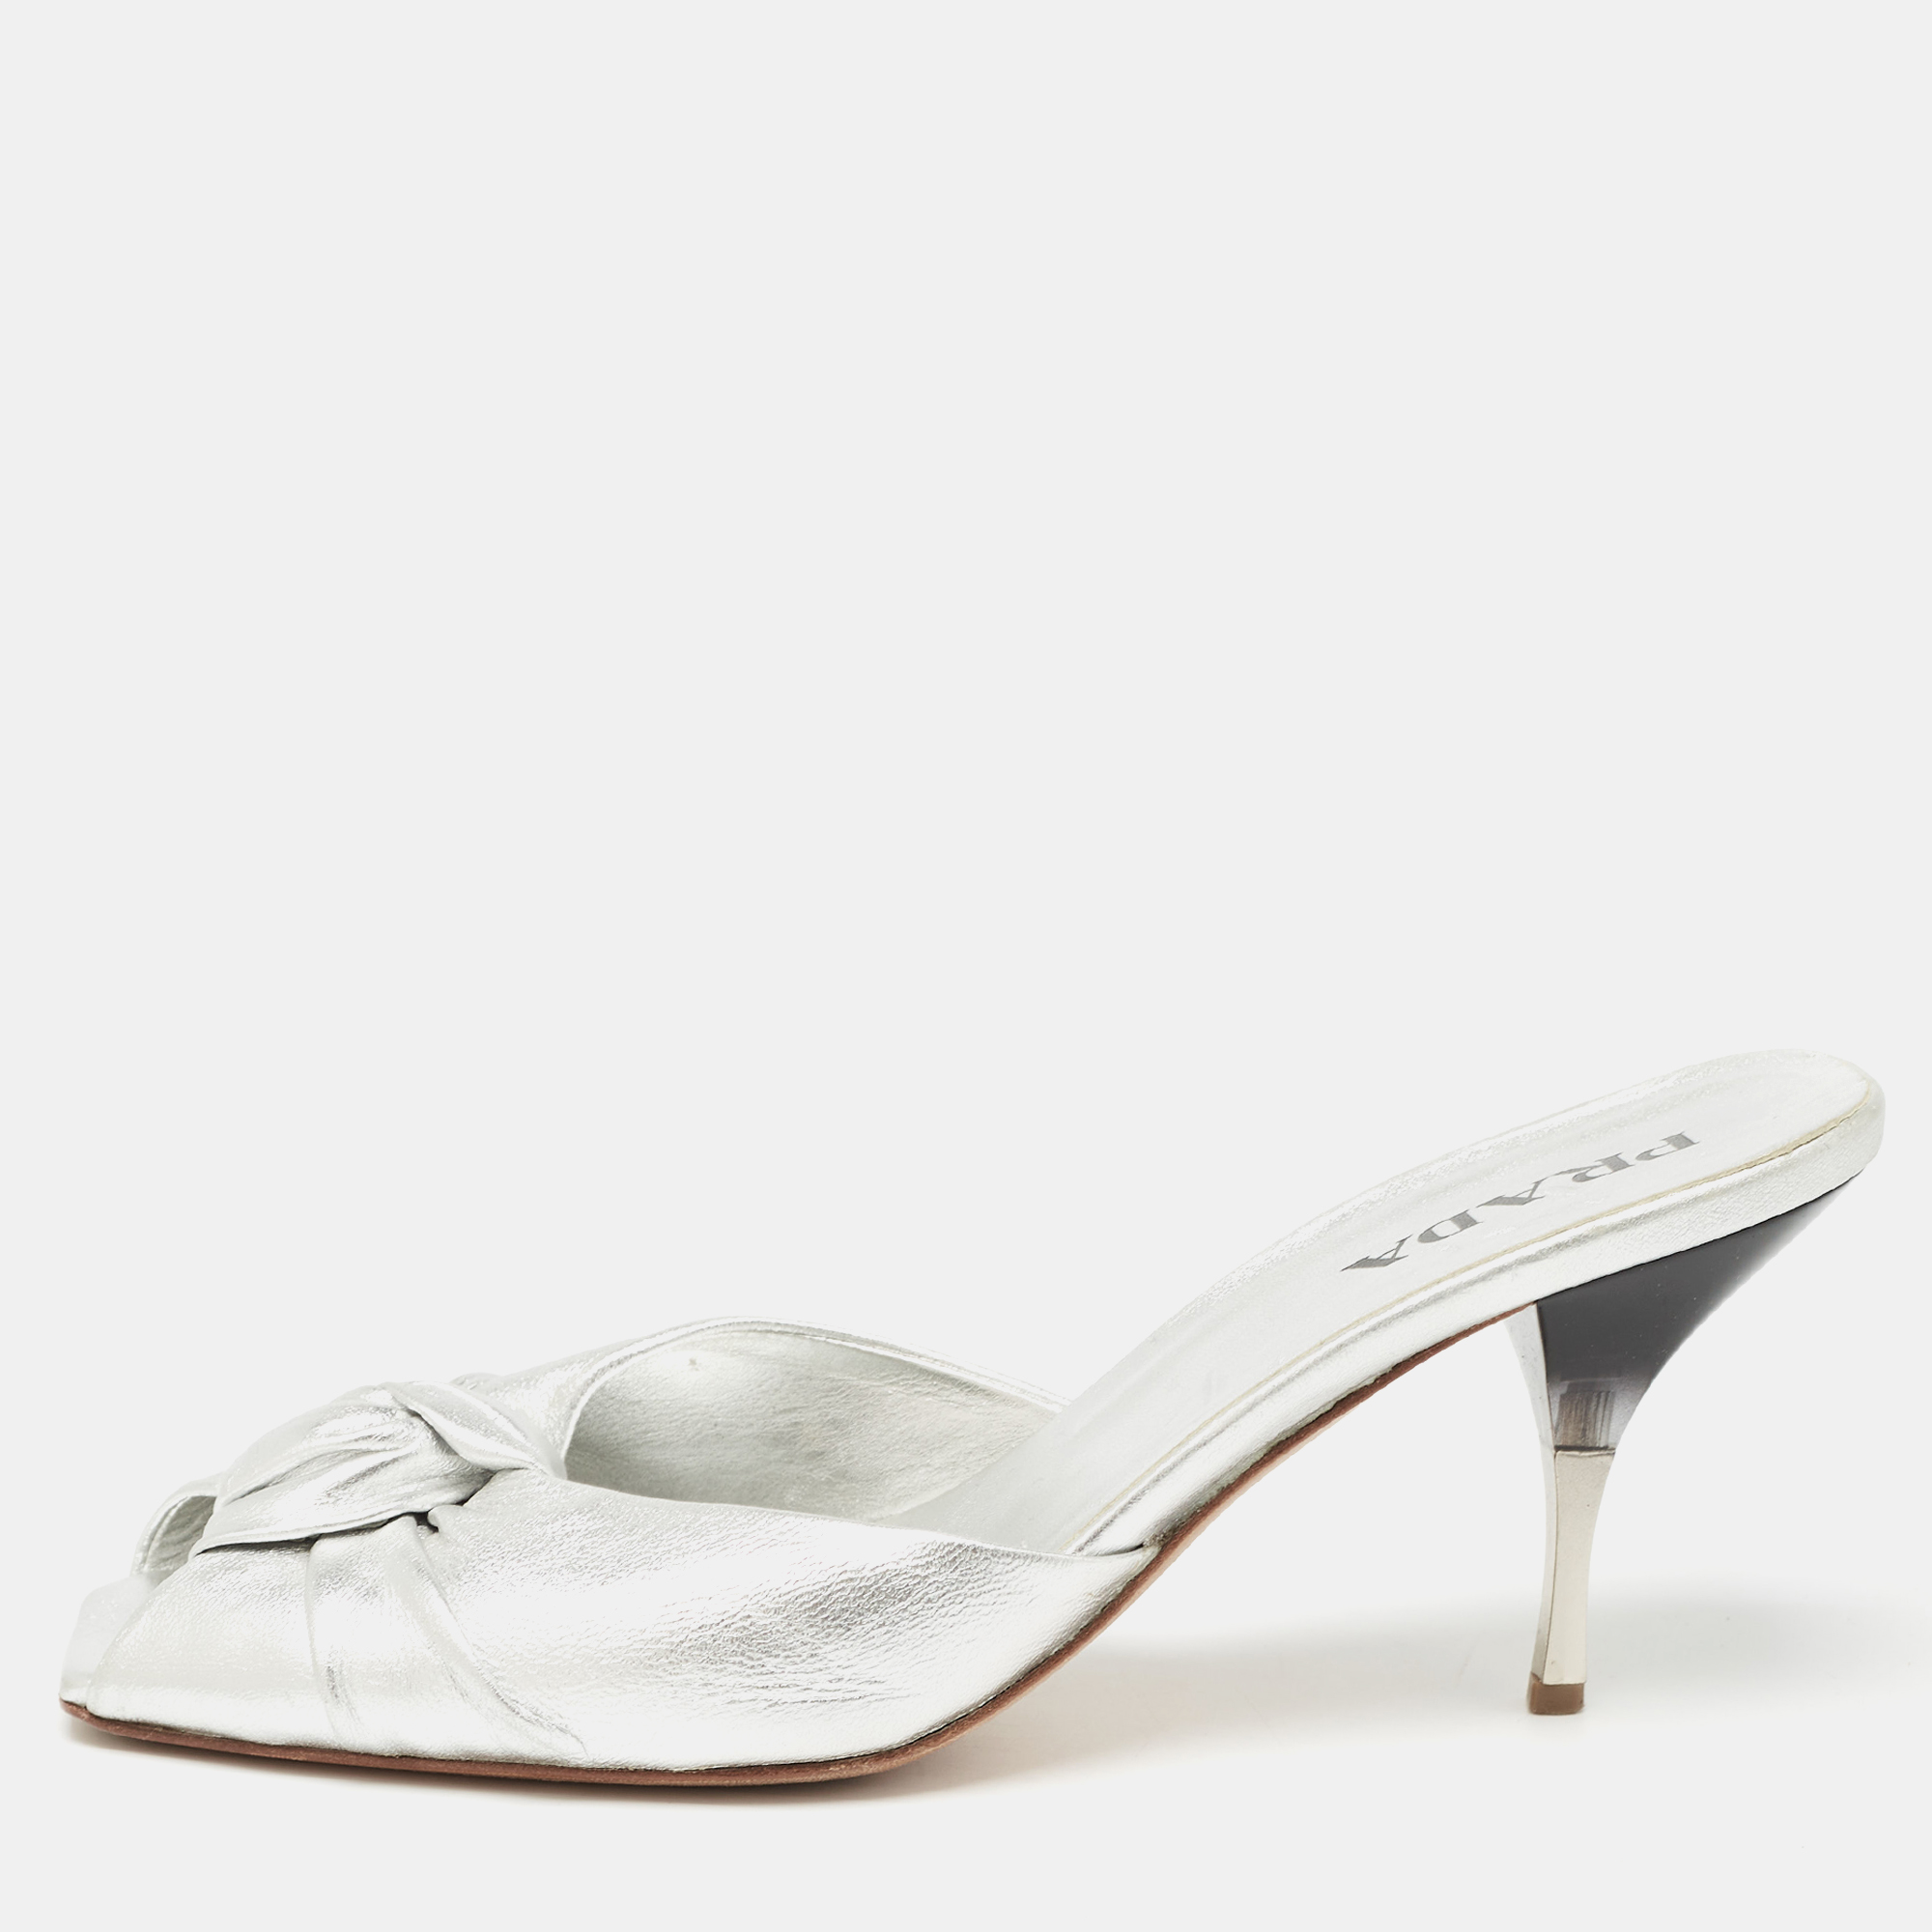 

Prada Silver Foil Leather Knotted Square Peep Toe Slide Sandals Size